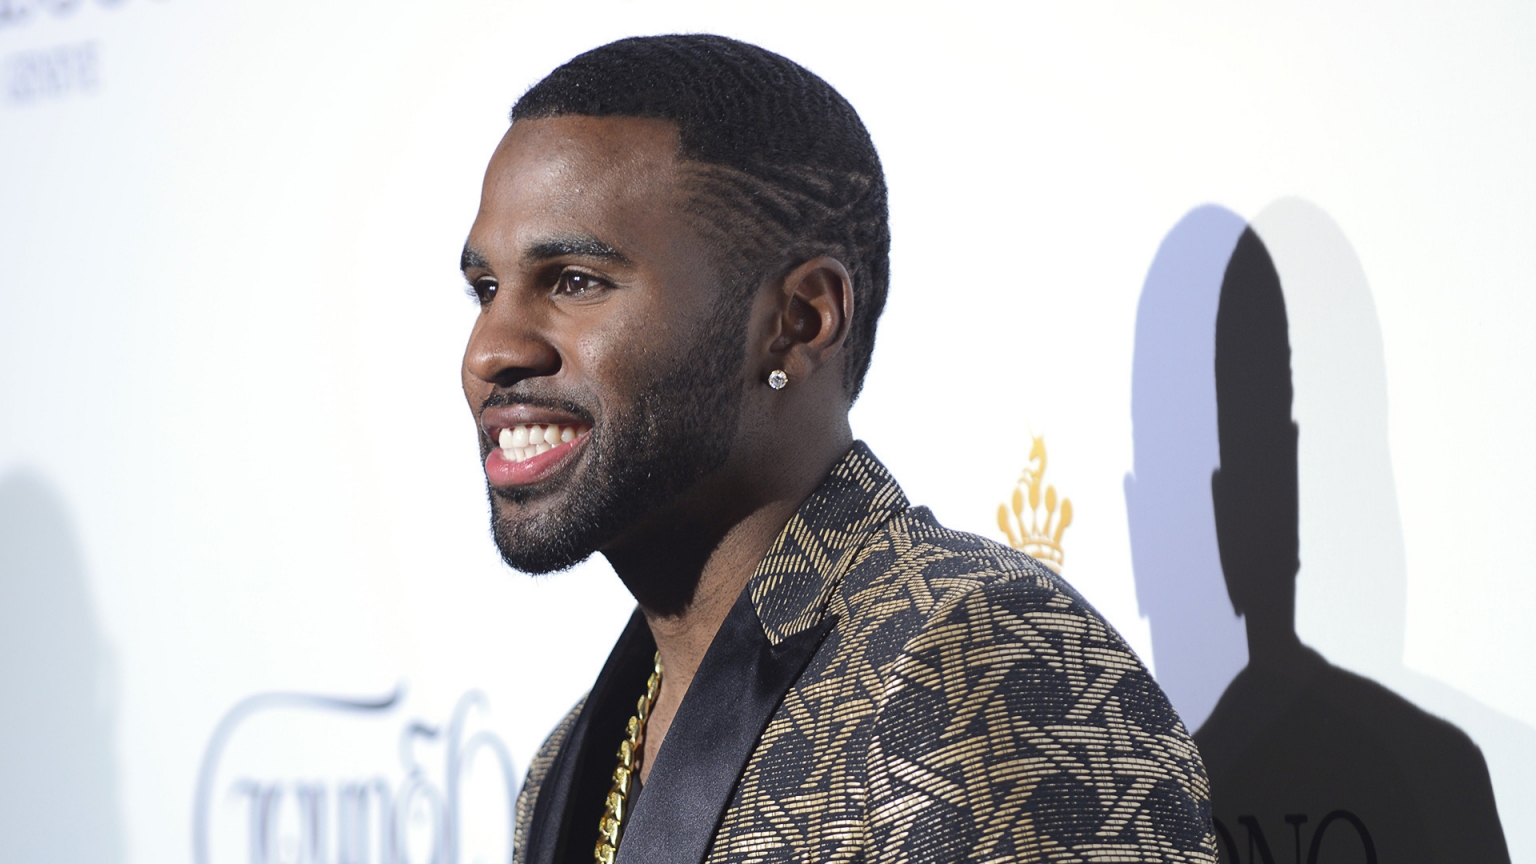 Jason Derulo at Cannes for 1536 x 864 HDTV resolution